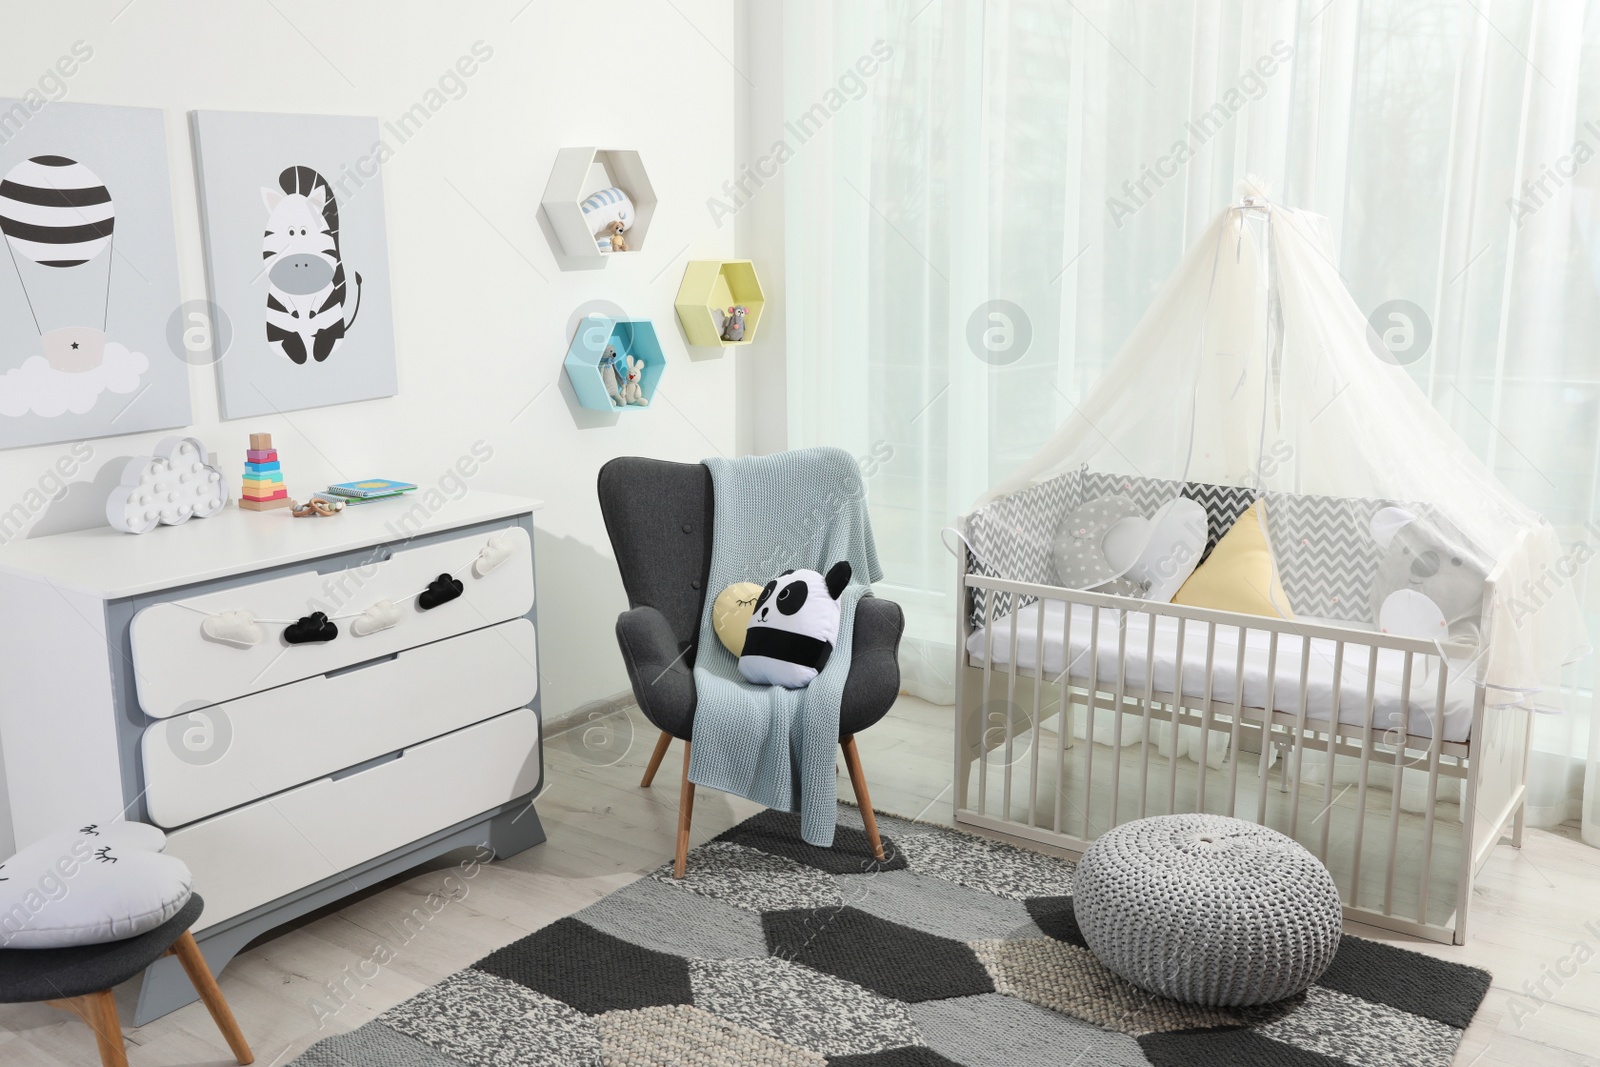 Photo of Cozy baby room with crib and other furniture. Interior design